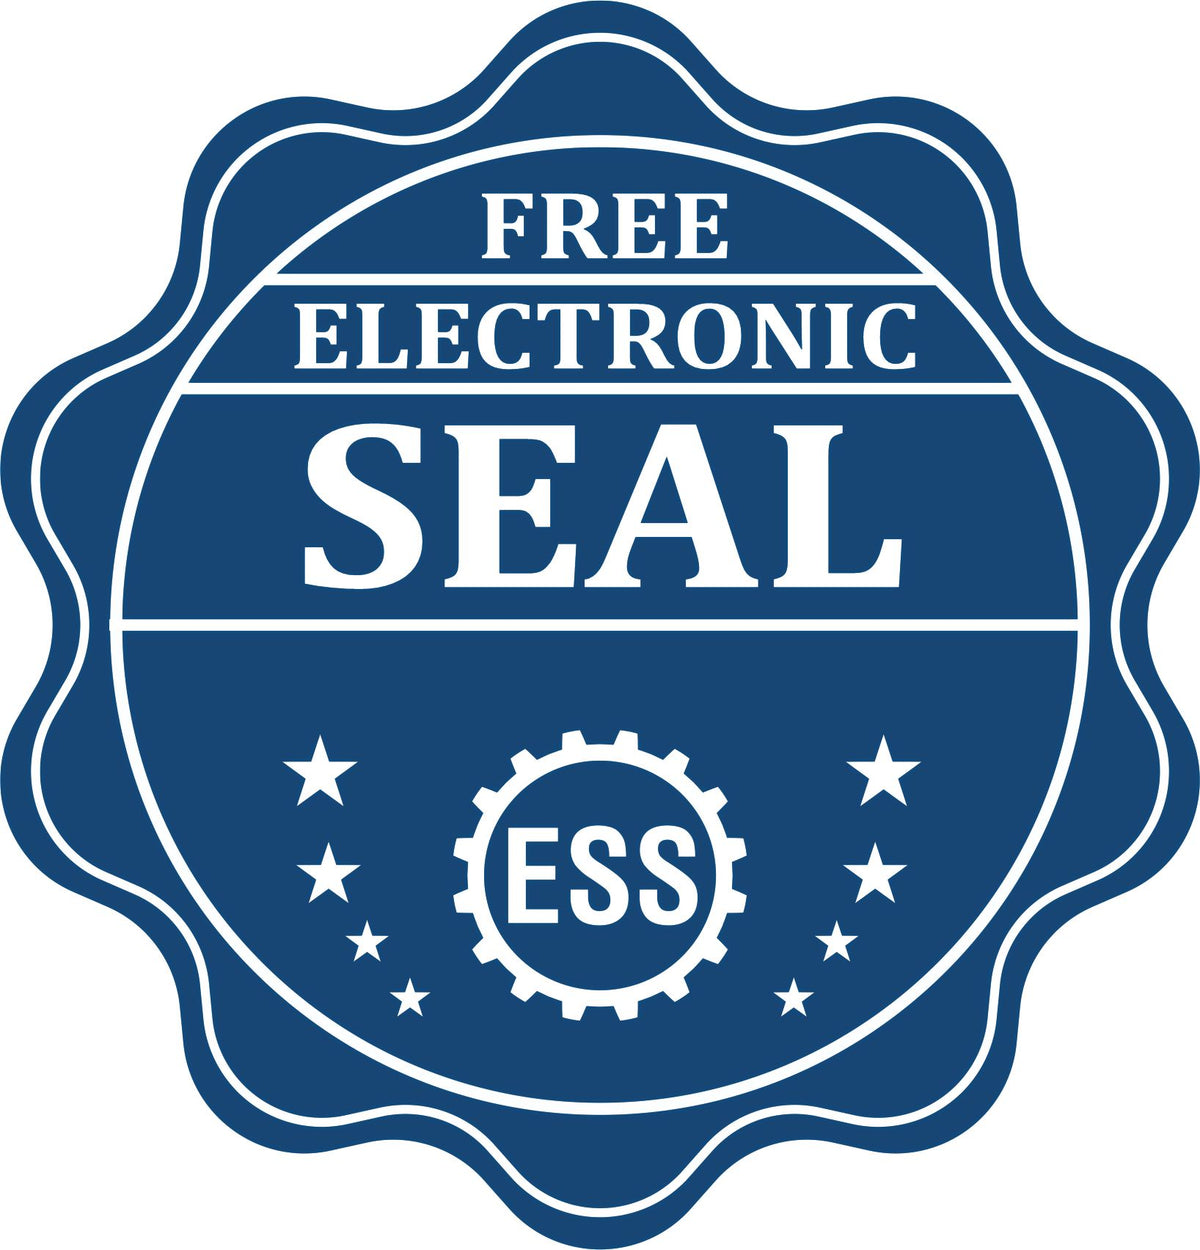 A badge showing a free electronic seal for the Colorado Geologist Desk Seal with stars and the ESS gear on the emblem.